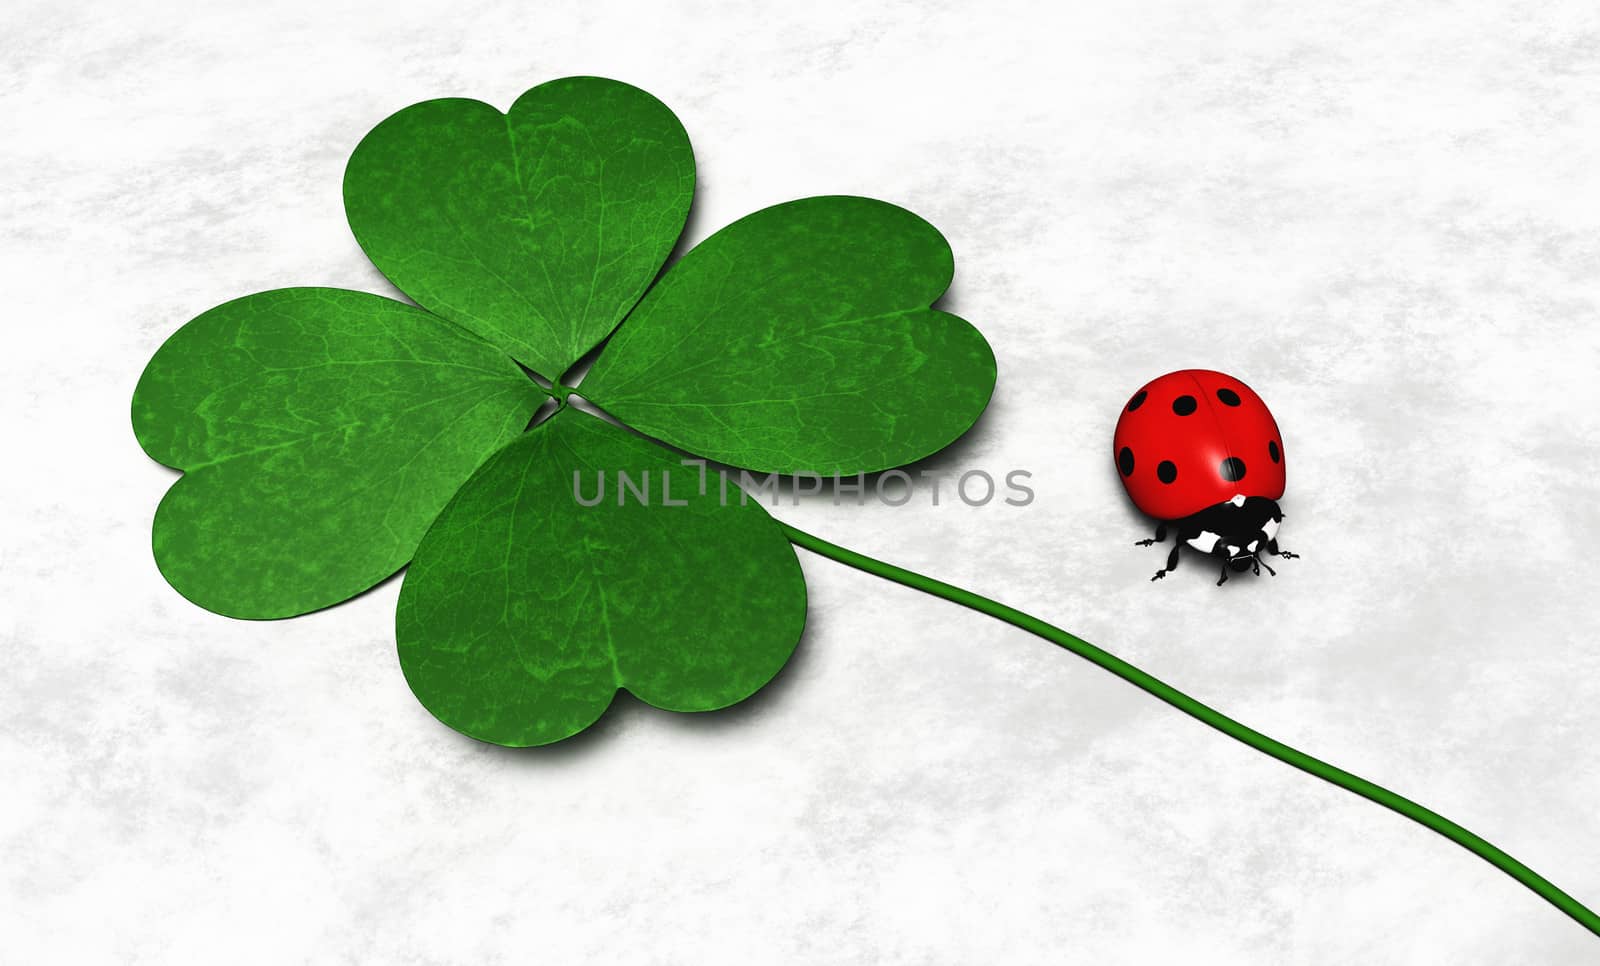 a green four-leaf clover is lying near a ladybug on a white and grey abstract ground